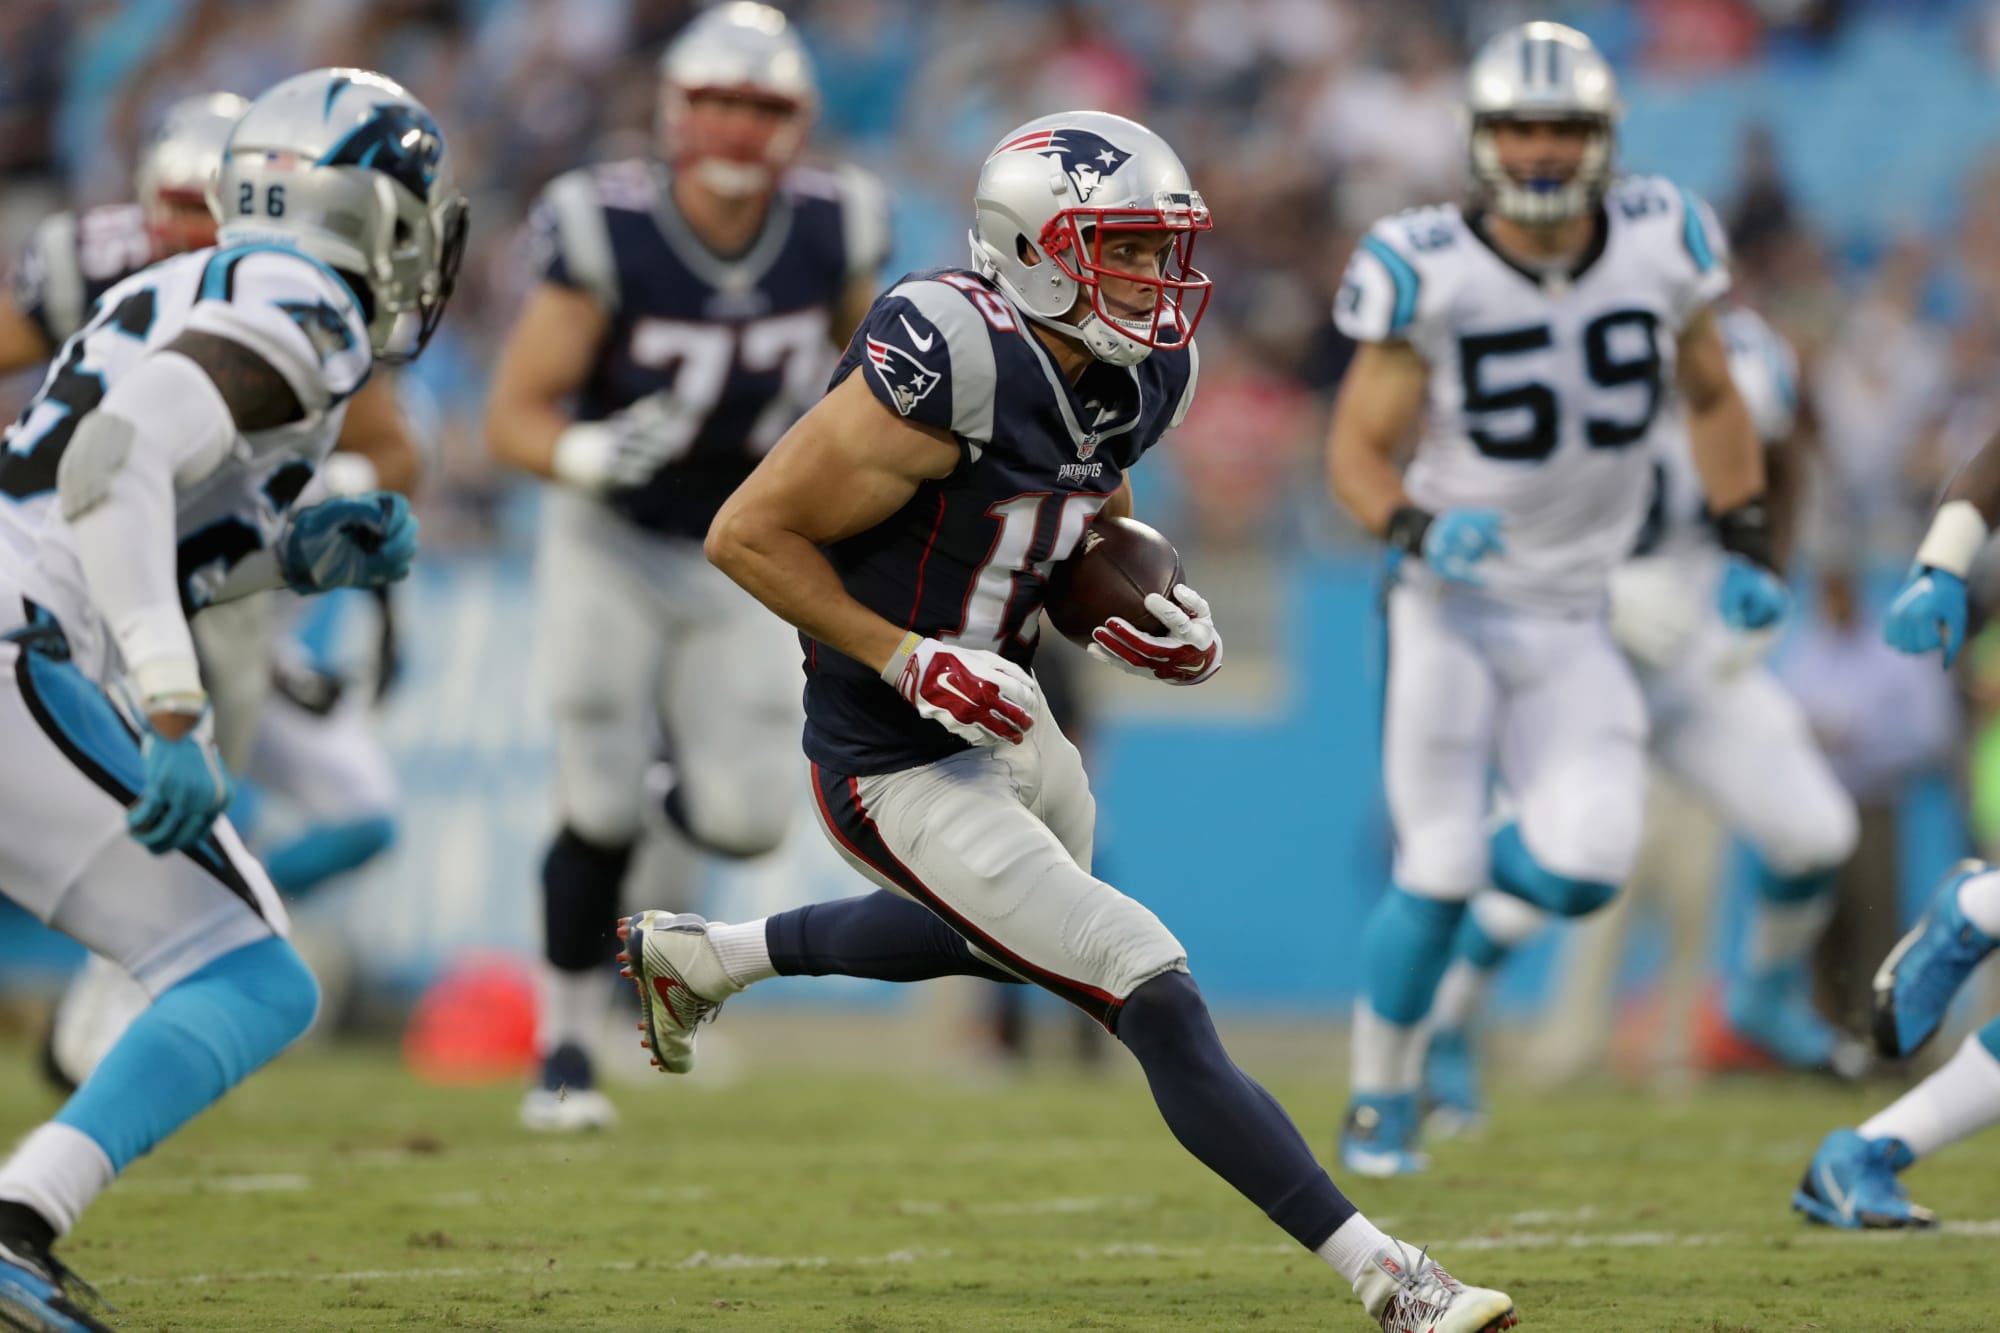 Panthers vs. Patriots: Preview, score prediction for Week 4